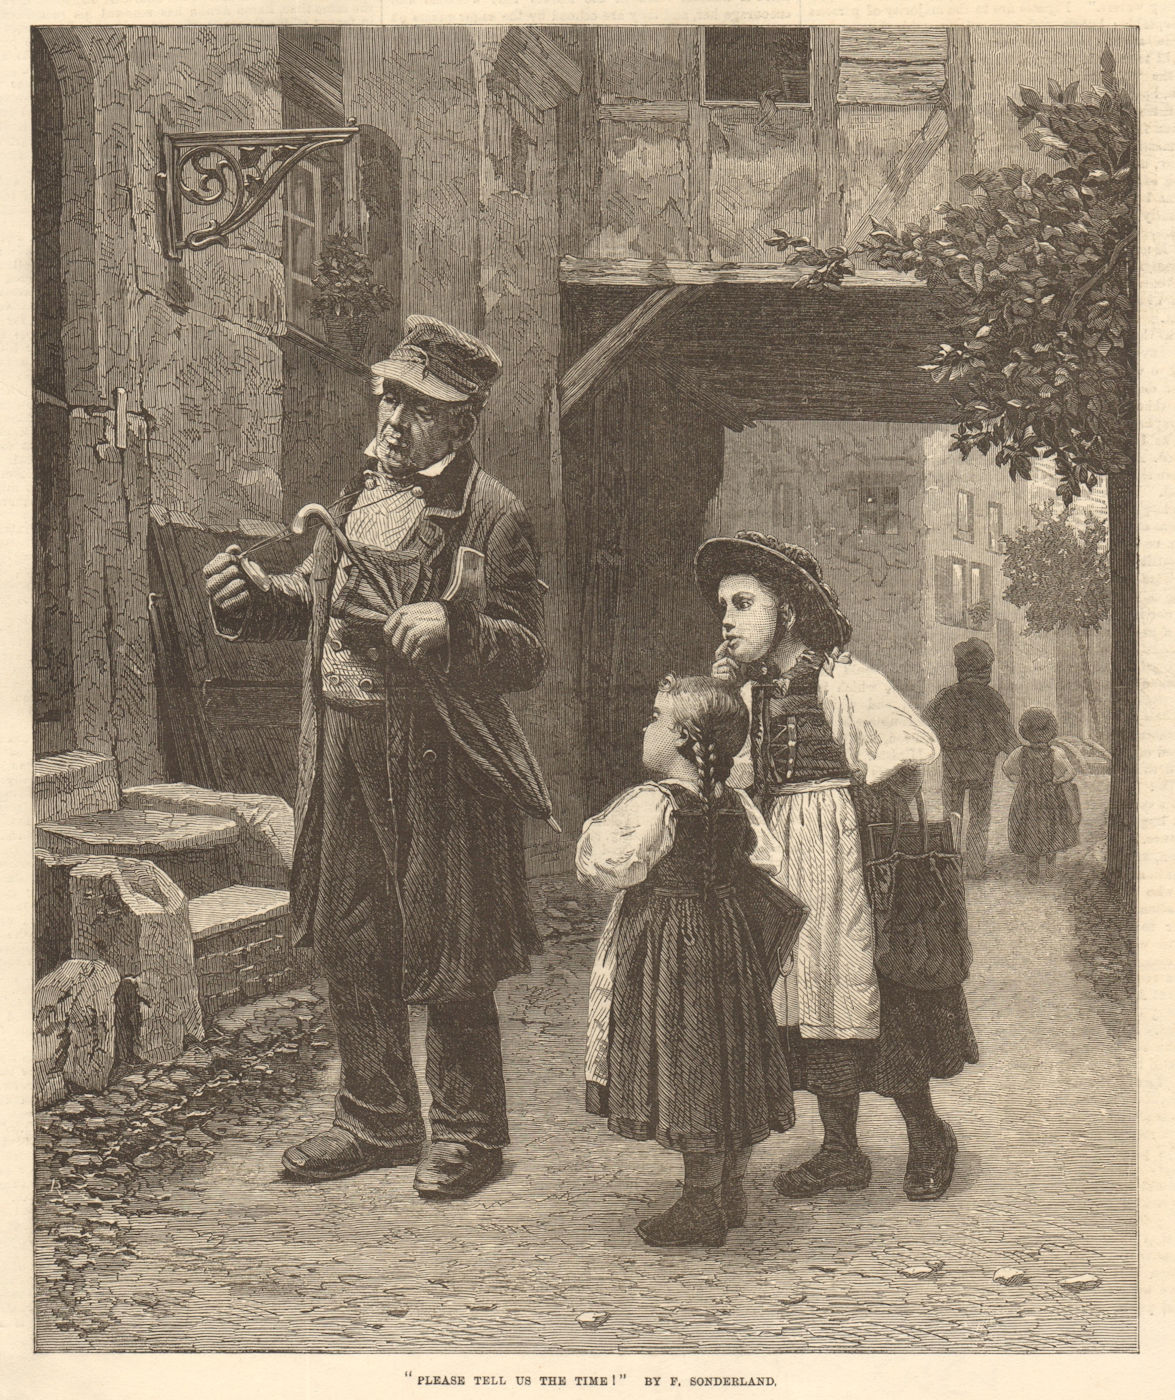 Associate Product "Please tell us the time", by F. Sonderland. Children. Children 1871 old print